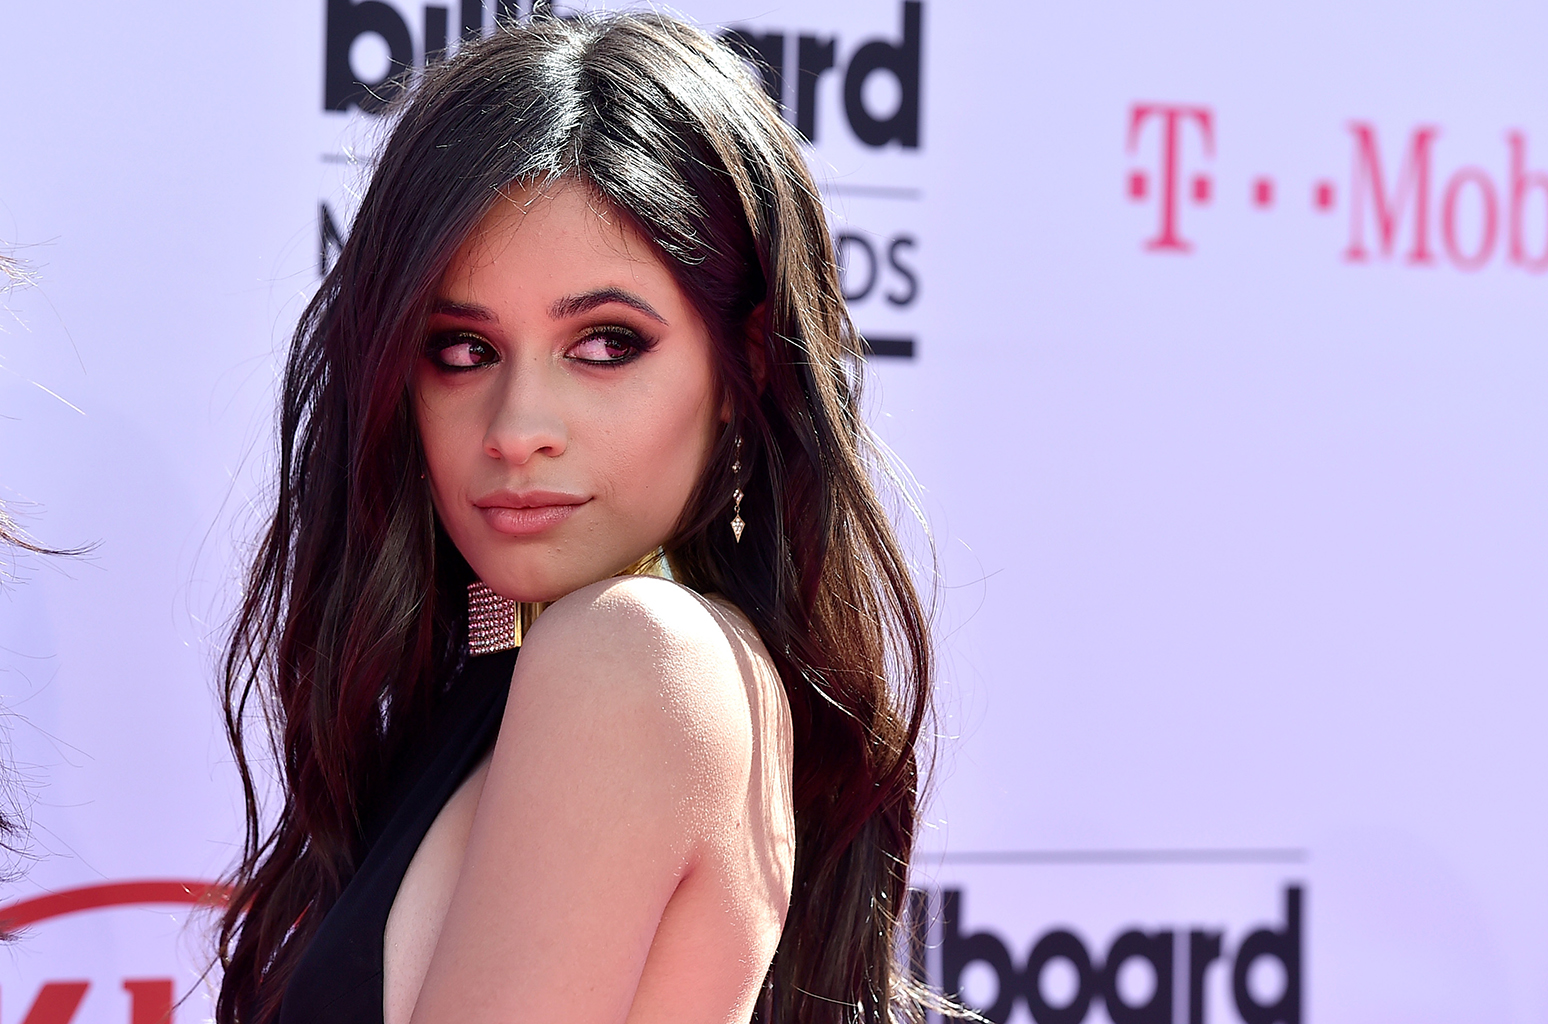 LAS VEGAS, NV - MAY 22:  Recording artist Camila Cabello of Fifth Harmony attends the 2016 Billboard Music Awards at T-Mobile Arena on May 22, 2016 in Las Vegas, Nevada.  (Photo by David Becker/Getty Images)